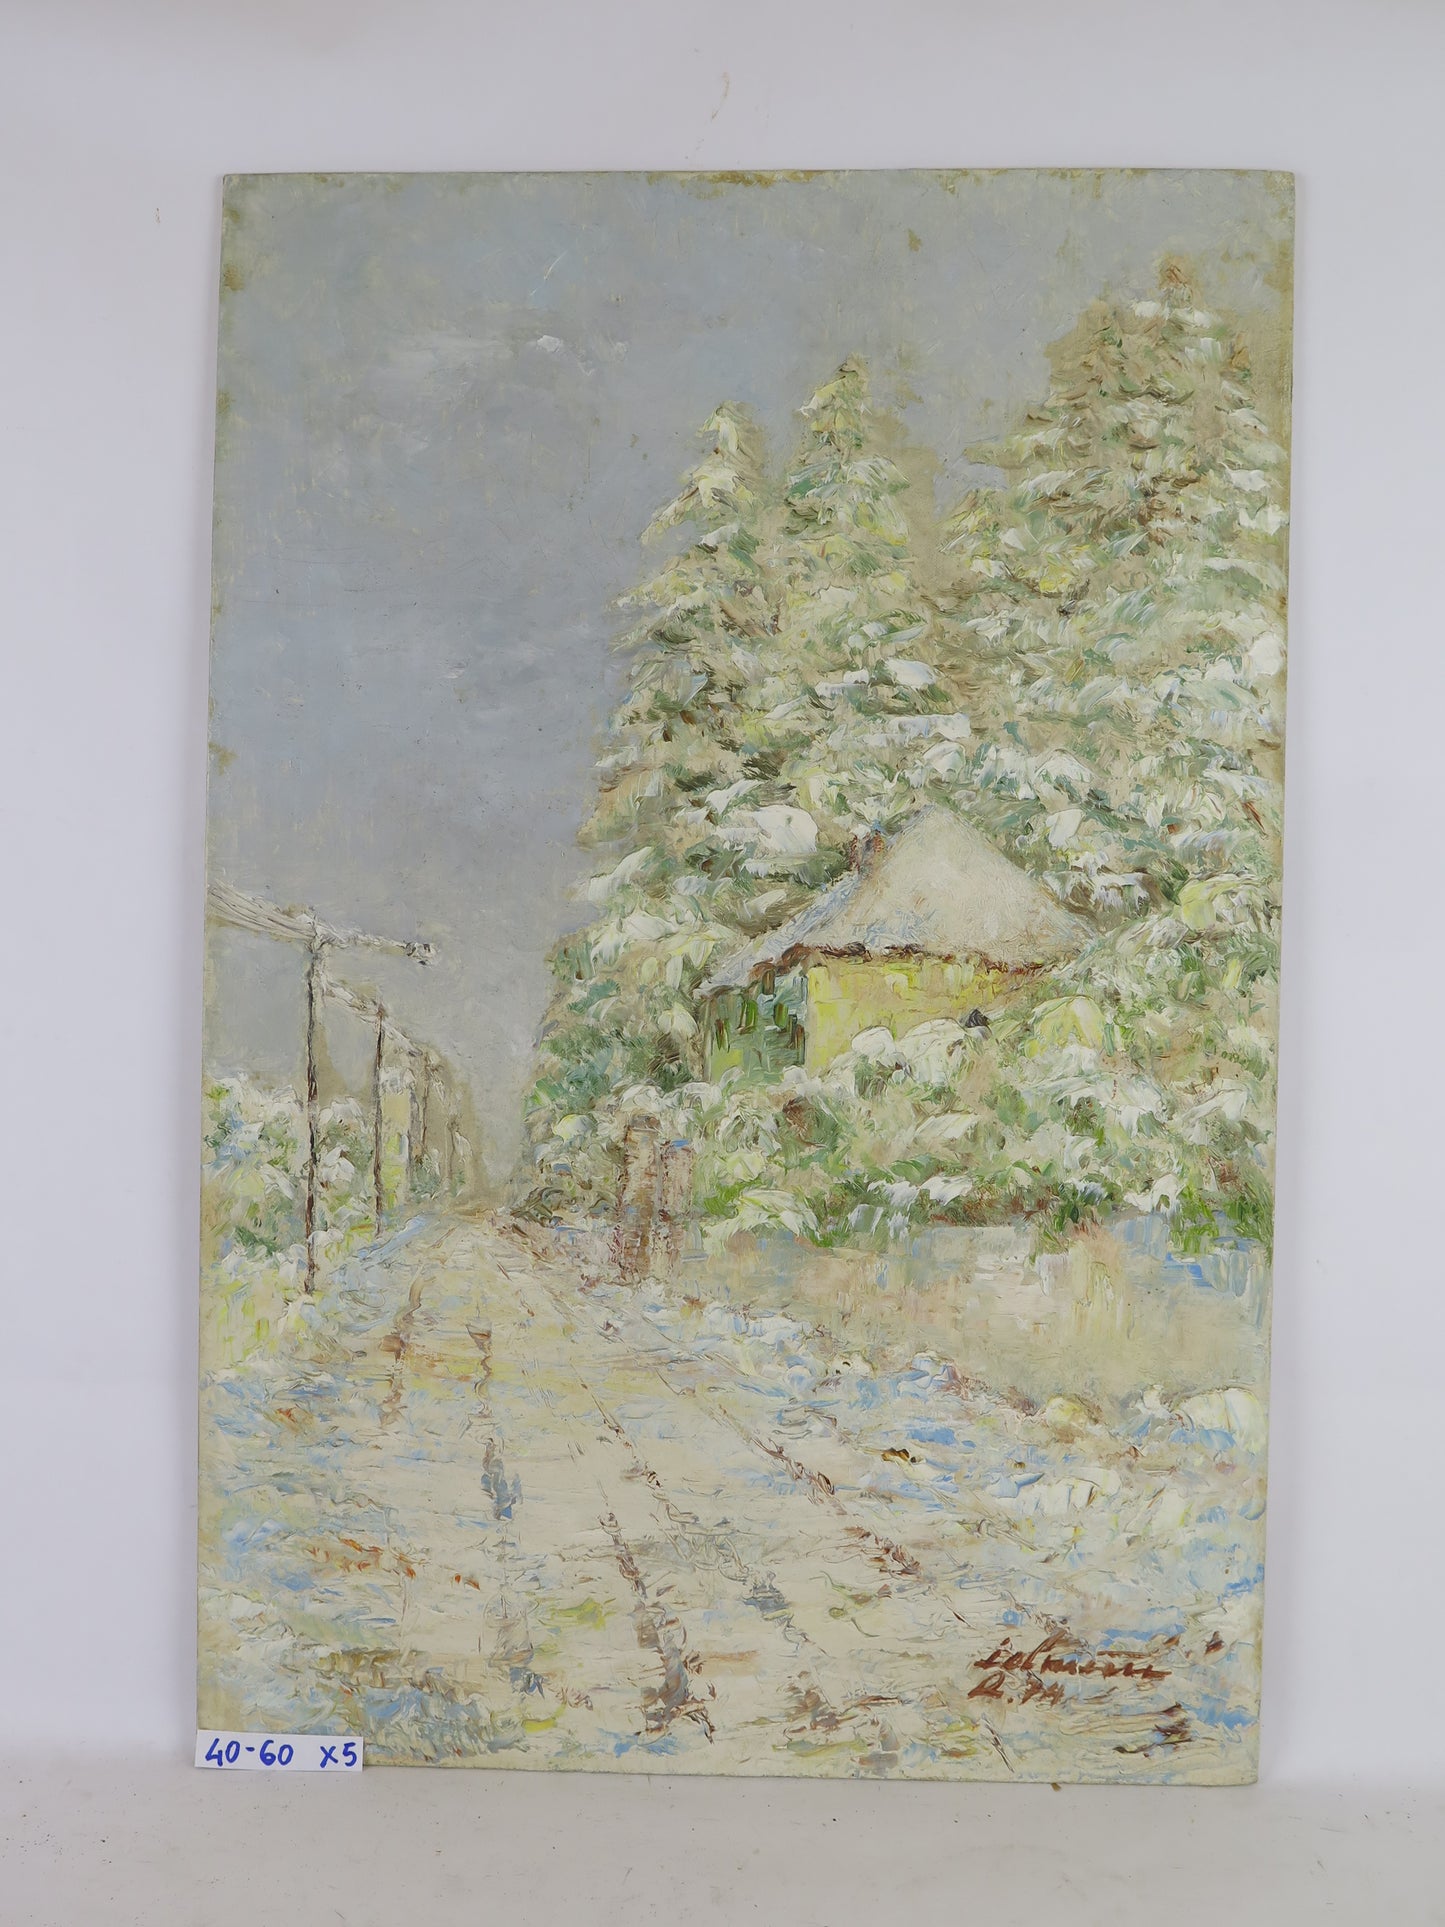 OIL PAINTING ON BOARD SIGNED SNOW COUNTRYSIDE LANDSCAPE OLD PAINTING X5